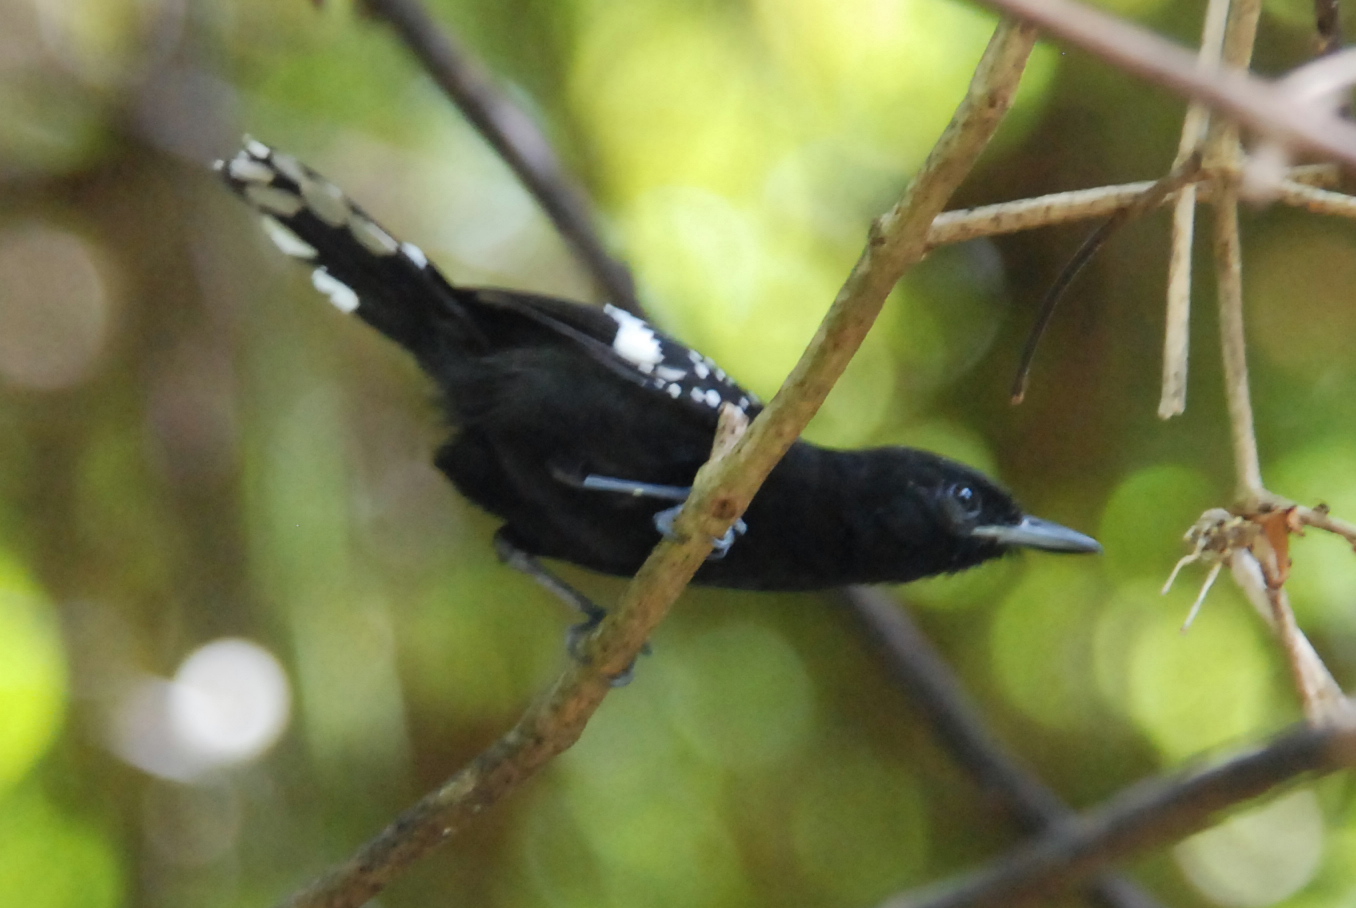 Click picture to see more Dot-winged Antwrens.